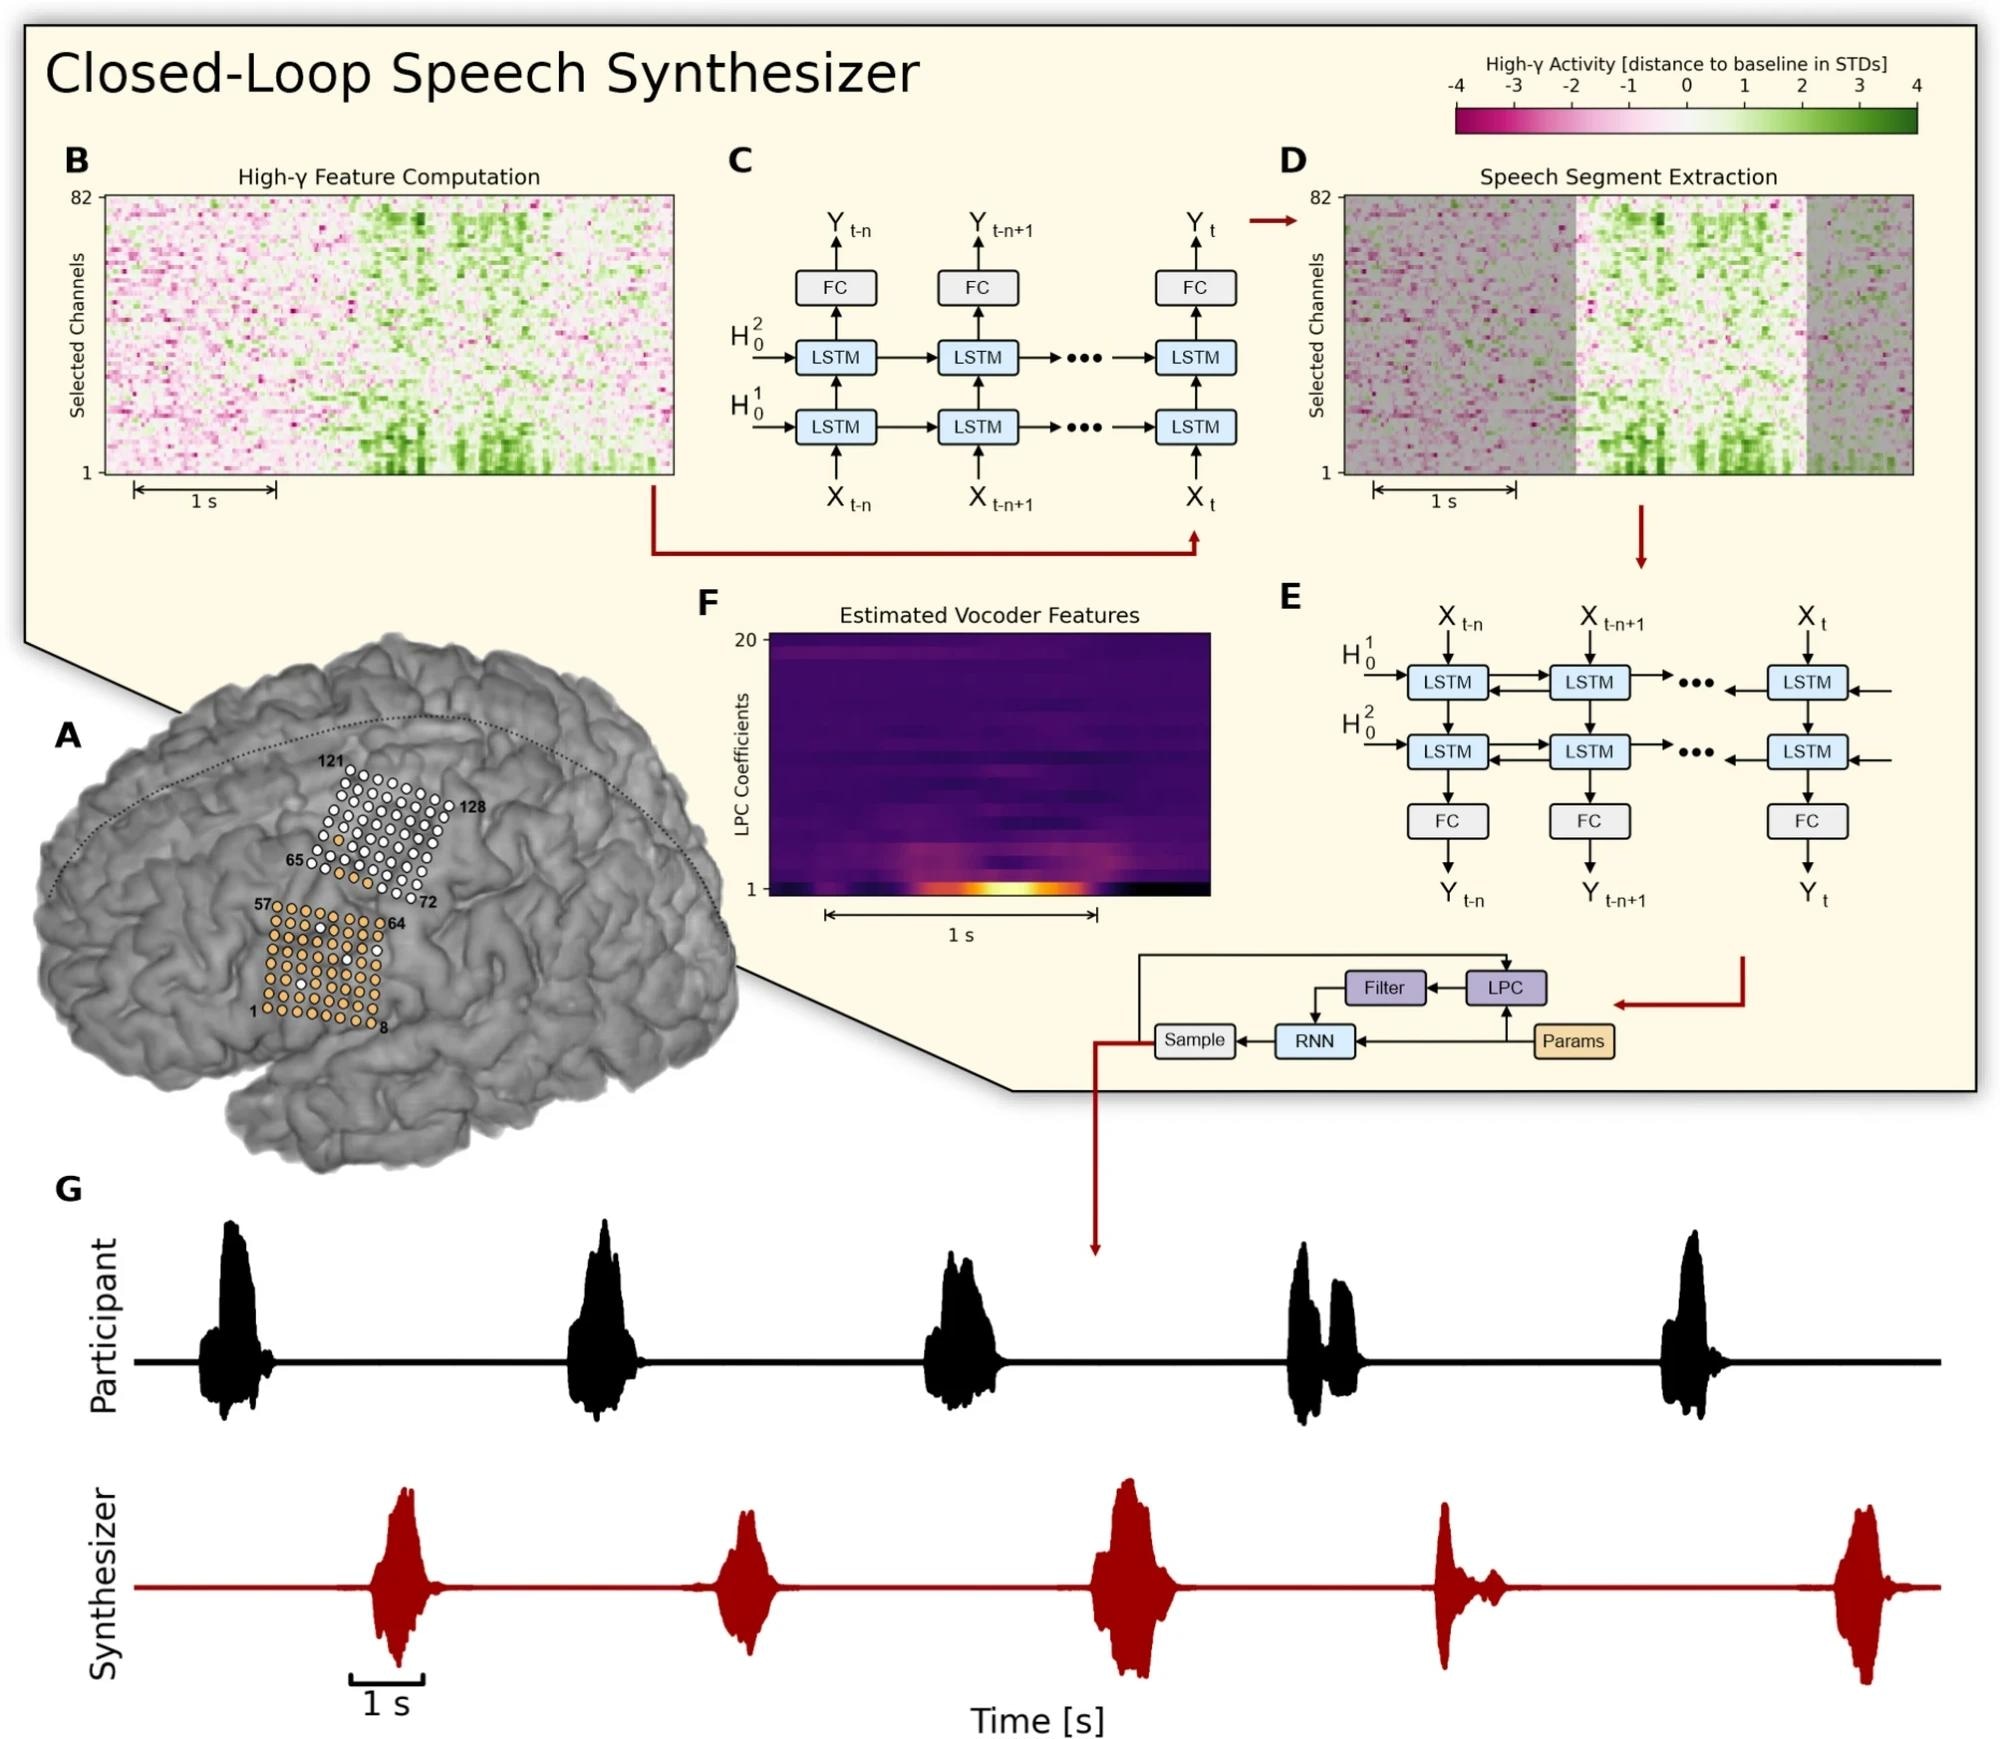 Overview of the closed-loop speech synthesizer. (A) Neural activity is acquired from a subset of 64 electrodes (highlighted in orange) from two 8 × 8 ECoG electrode arrays covering sensorimotor areas for face and tongue, and for upper limb regions. (B) The closed-loop speech synthesizer extracts high-gamma features to reveal speech-related neural correlates of attempted speech production and propagates each frame to a neural voice activity detection (nVAD) model (C) that identifies and extracts speech segments (D). When the participant finishes speaking a word, the nVAD model forwards the high-gamma activity of the whole extracted sequence to a bidirectional decoding model (E) which estimates acoustic features (F) that can be transformed into an acoustic speech signal. (G) The synthesized speech is played back as acoustic feedback.